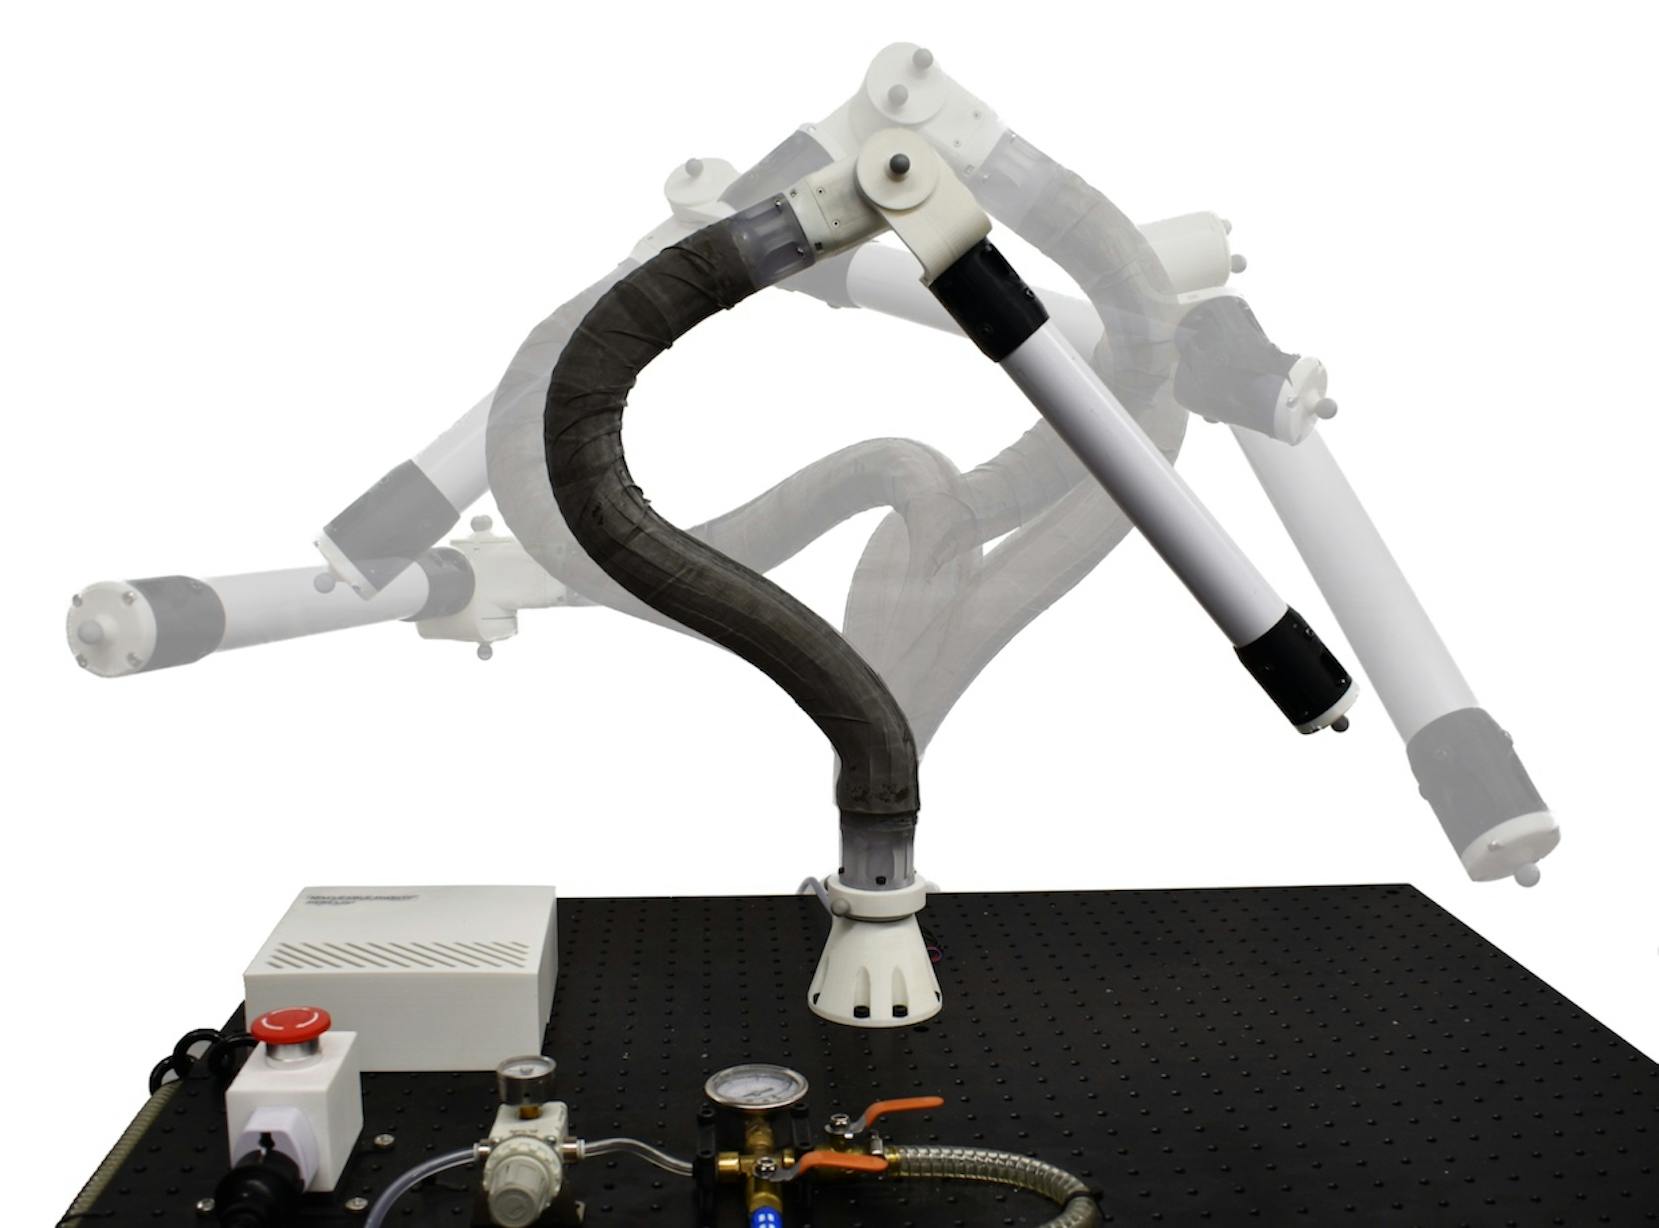 Malleable Structure Increases Robot Arm Without Adding Extra Parts - Hackster.io